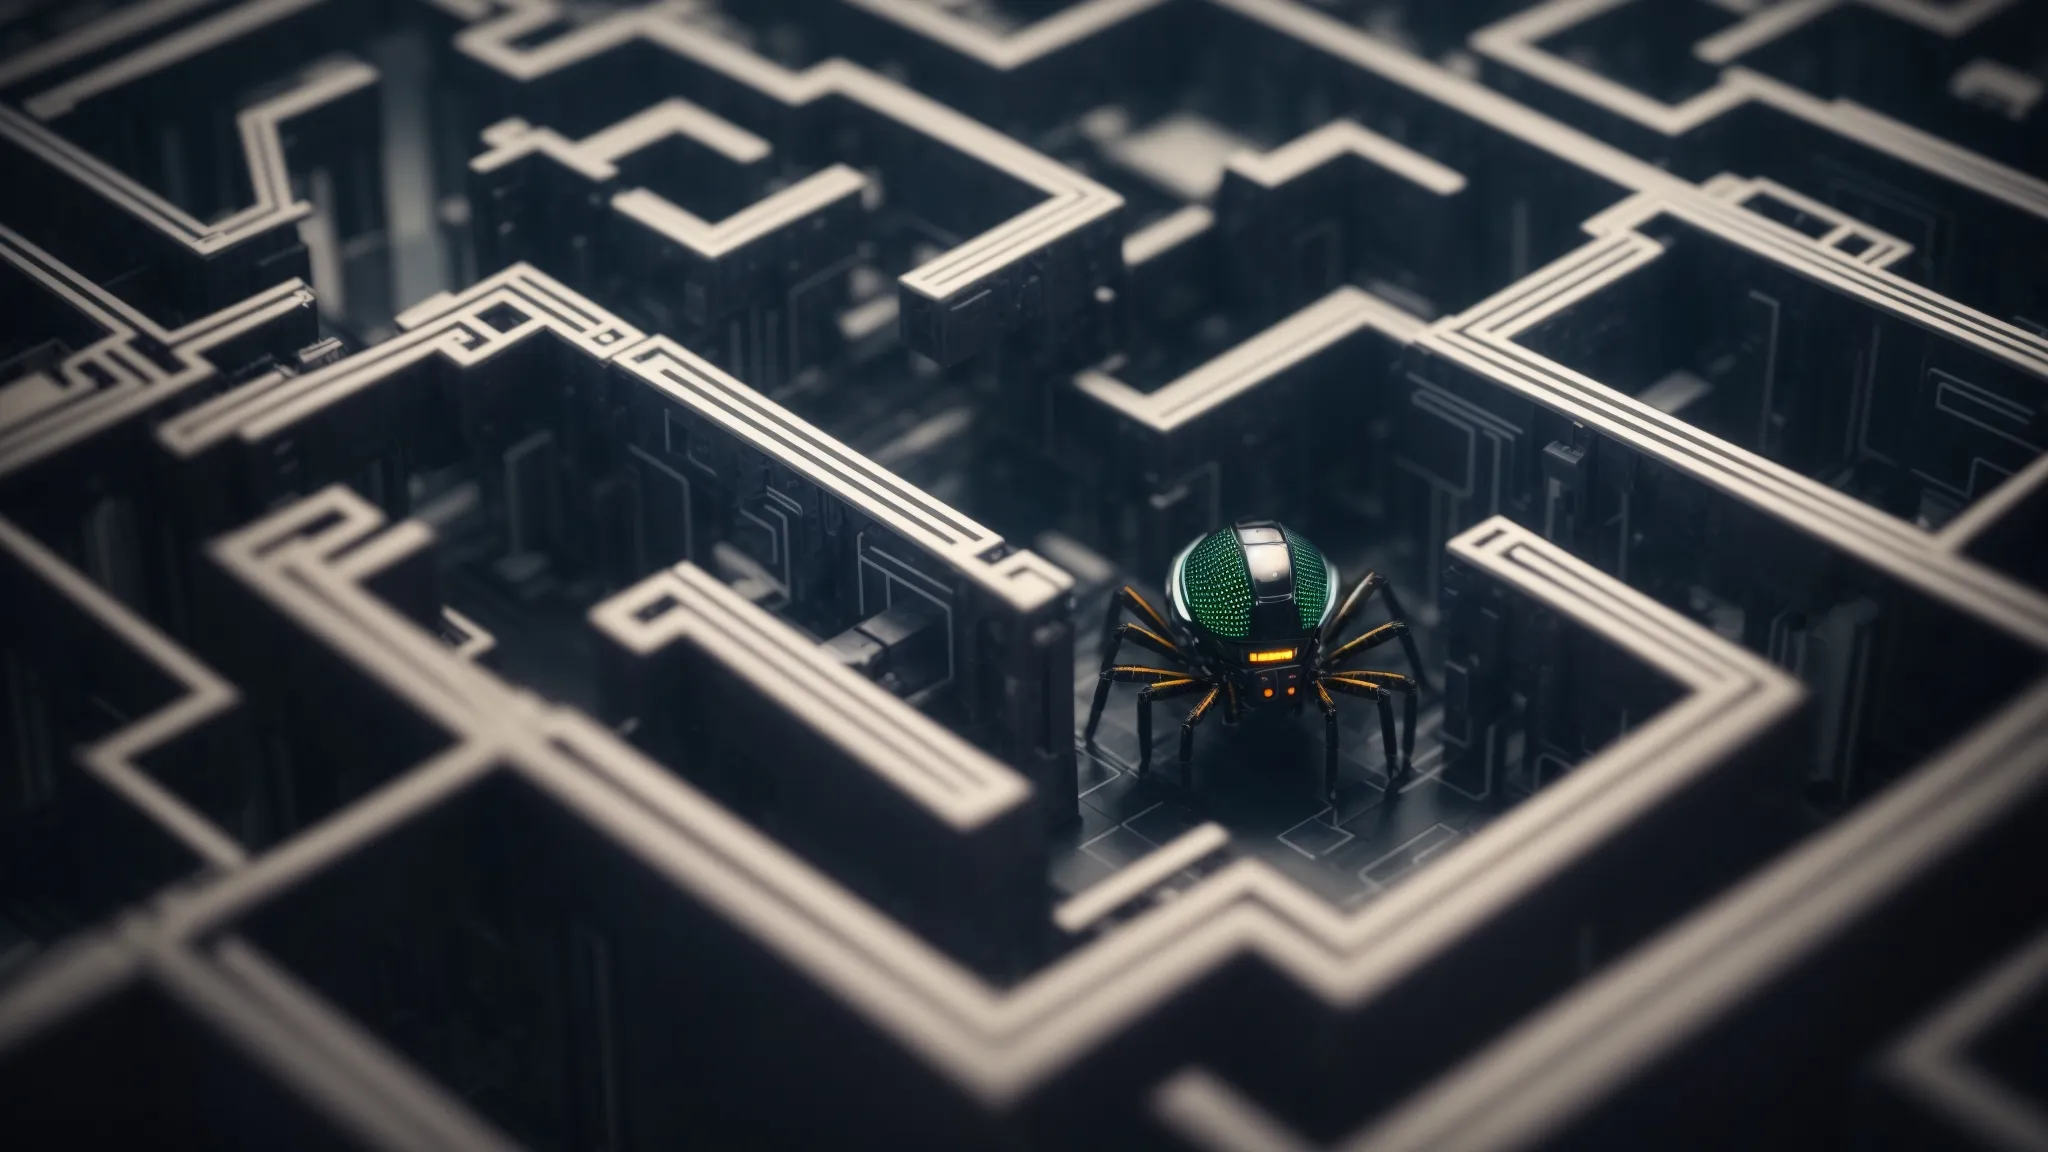 a spider robot exploring a digital maze symbolizes search engine crawlers analyzing a website's structure.